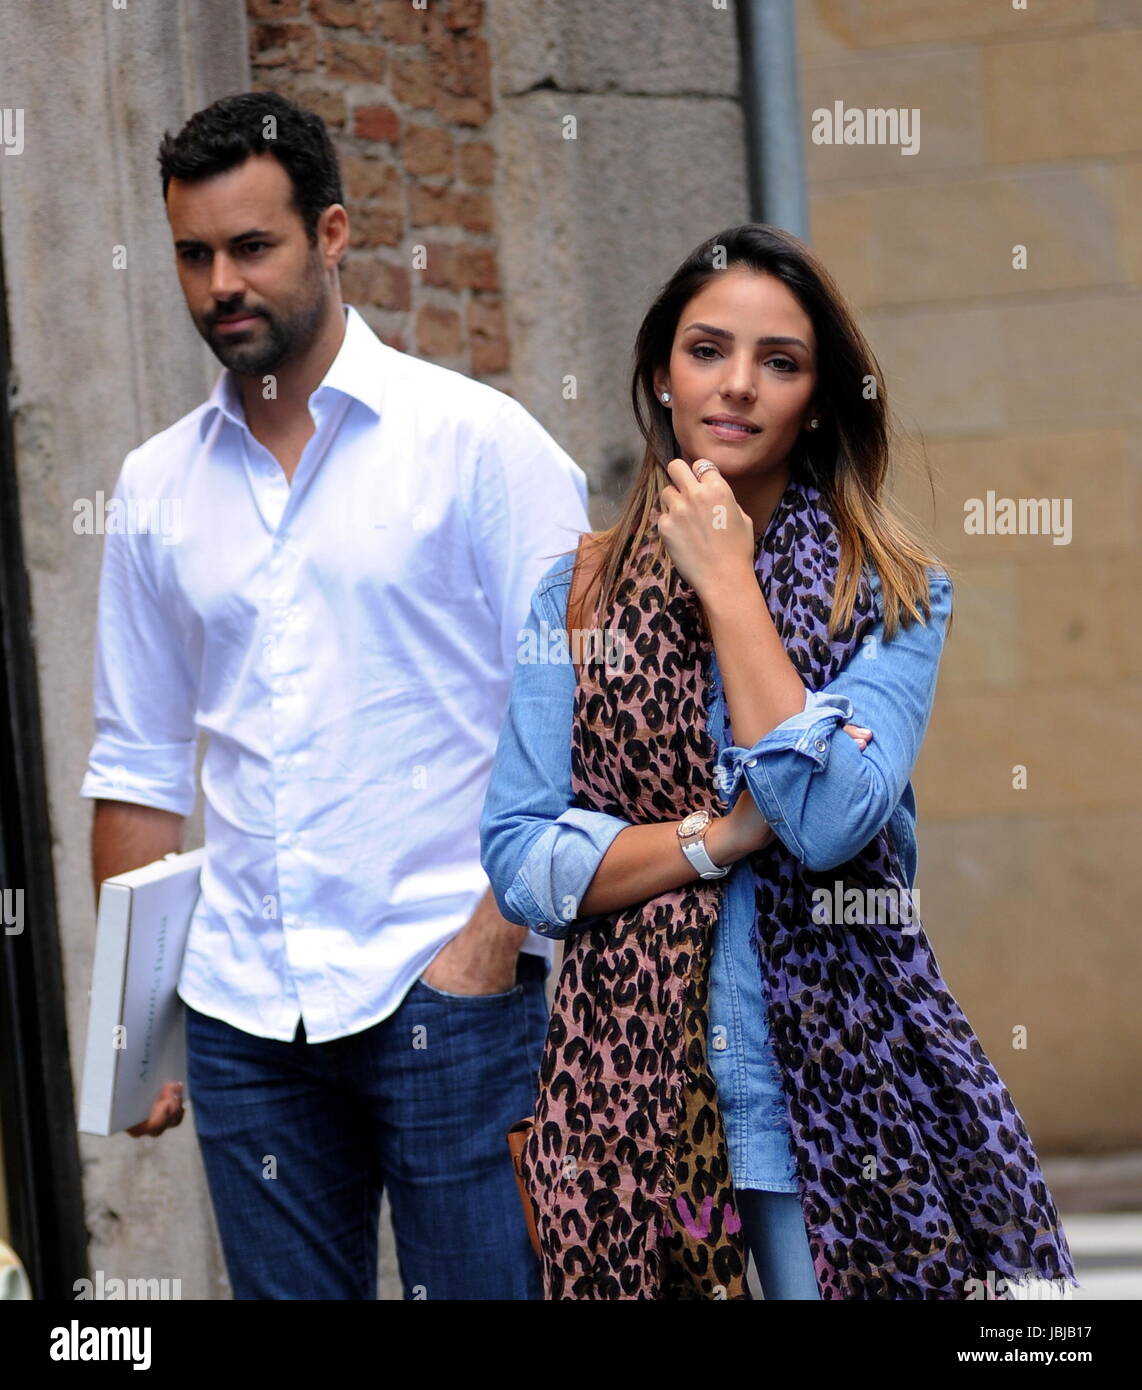 Caroline Celico and her boyfriend, Eduardo Scarpa shopping in Milan  Featuring: Caroline Celico, Eduardo Scarpa Where: Milan, Italy When: 10 May  2017 Credit: IPA/WENN.com **Only available for publication in UK, USA,  Germany,